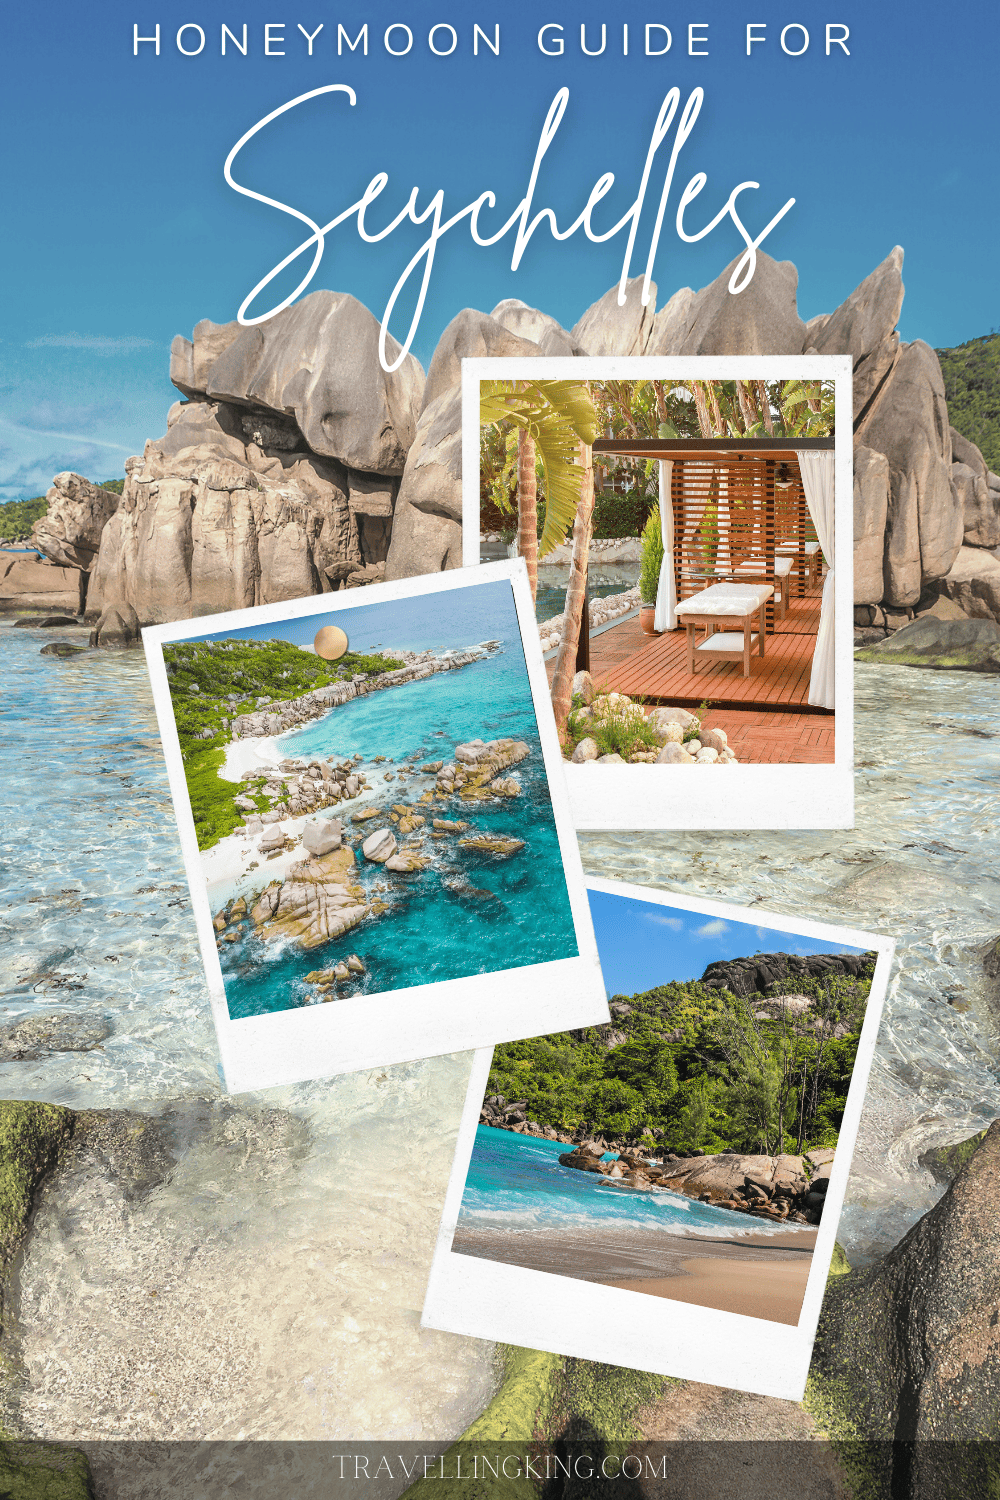 The Only Honeymoon Guide to Seychelles You’ll Ever Need